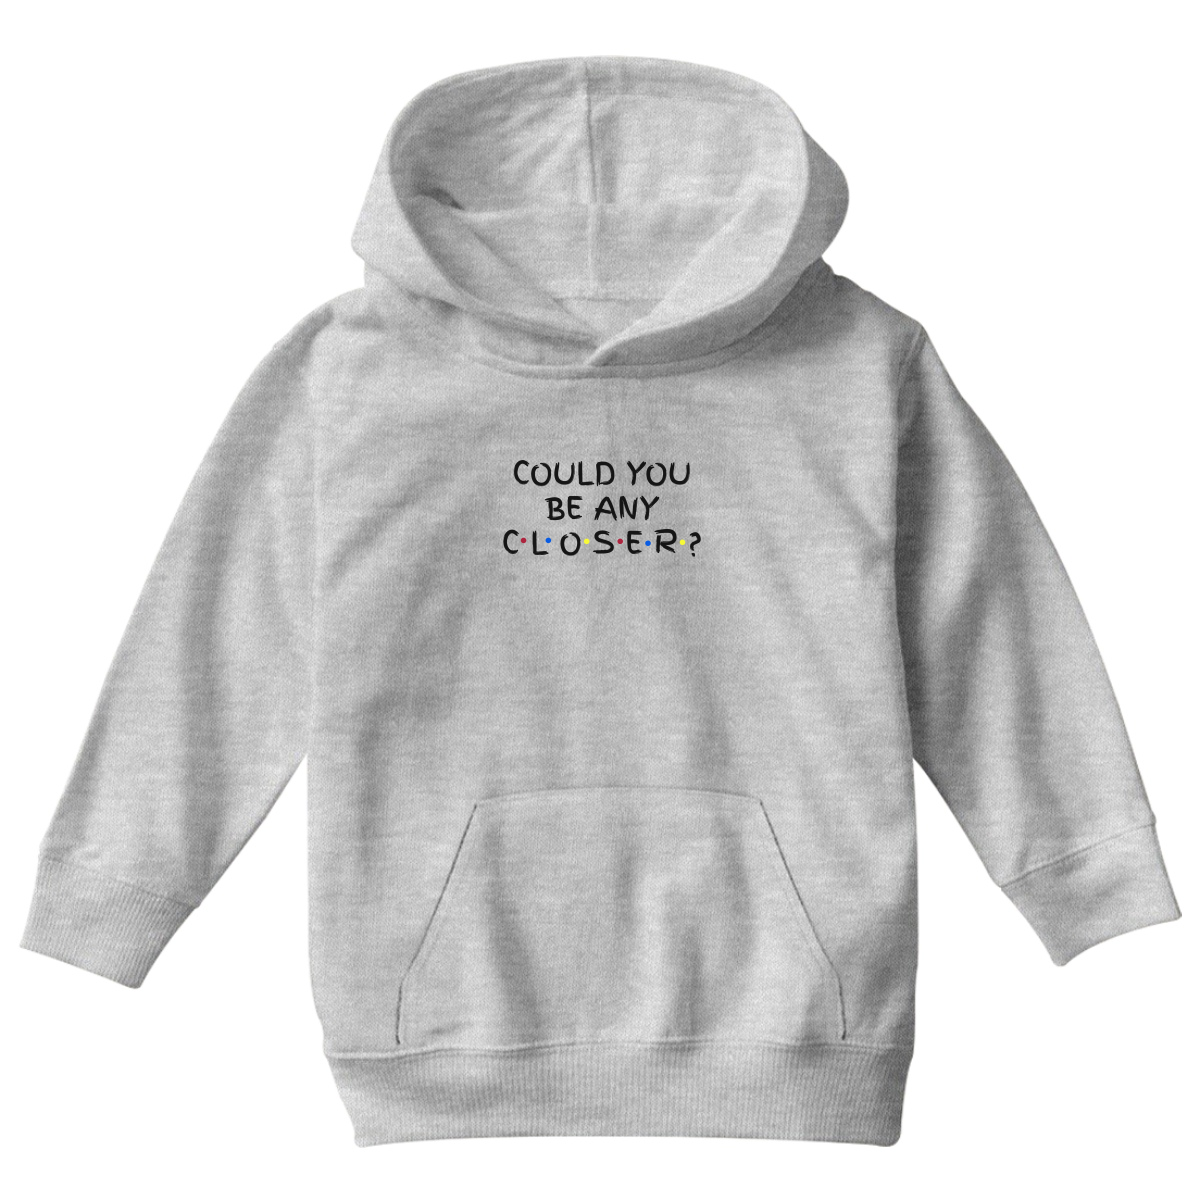 Could You Be Any Closer? Kids Hoodie | Gray